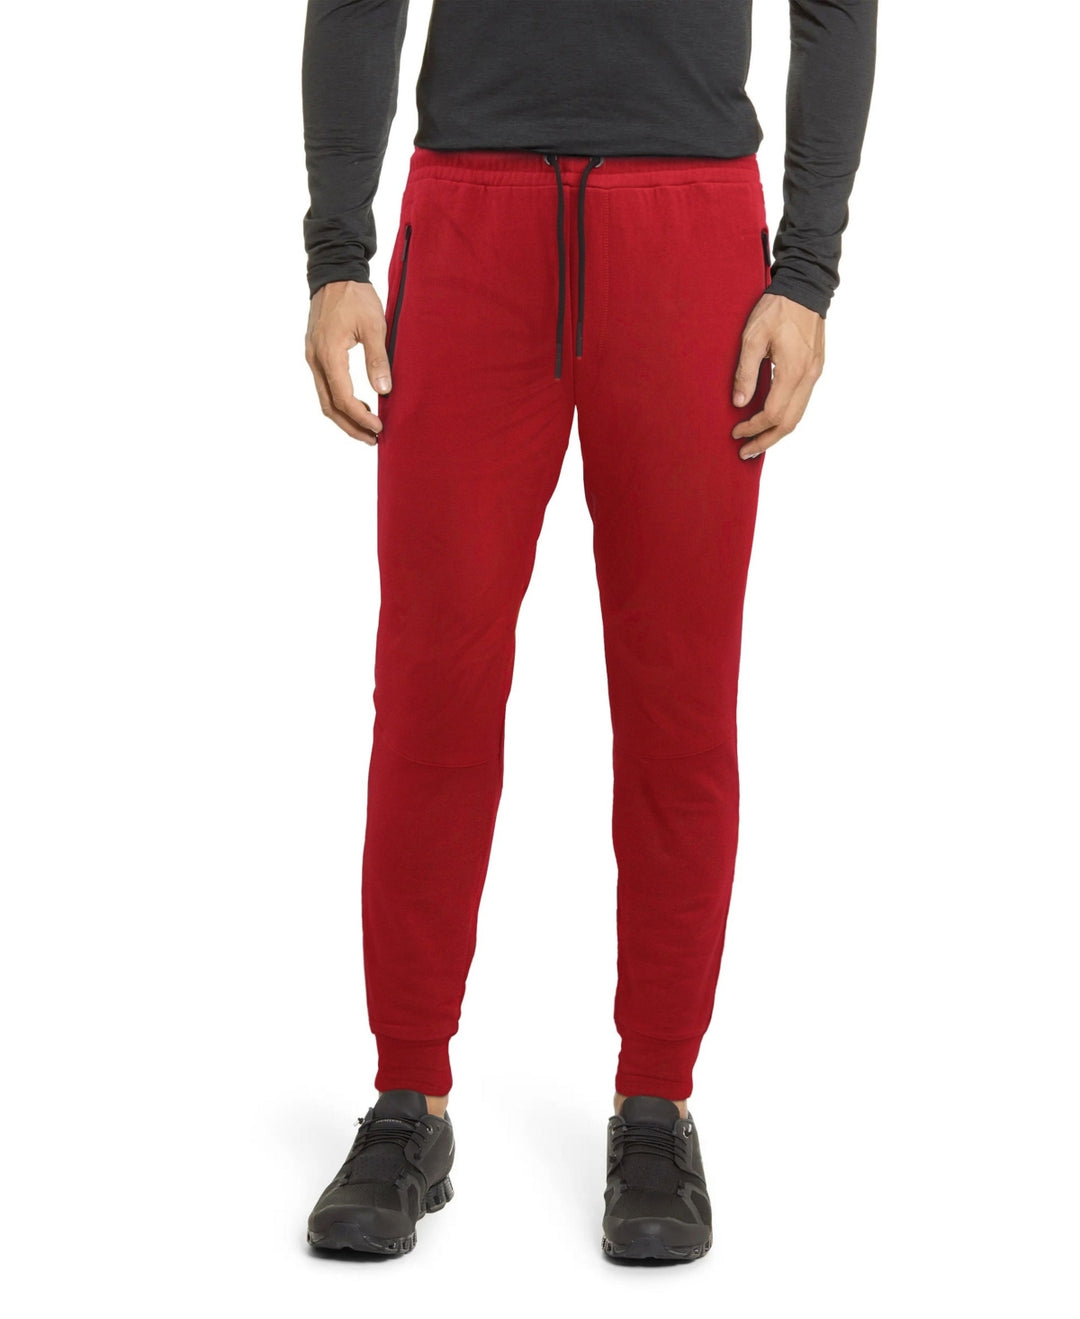 X-Ray Men's Fleece Jogger Pants Red Size X-Large